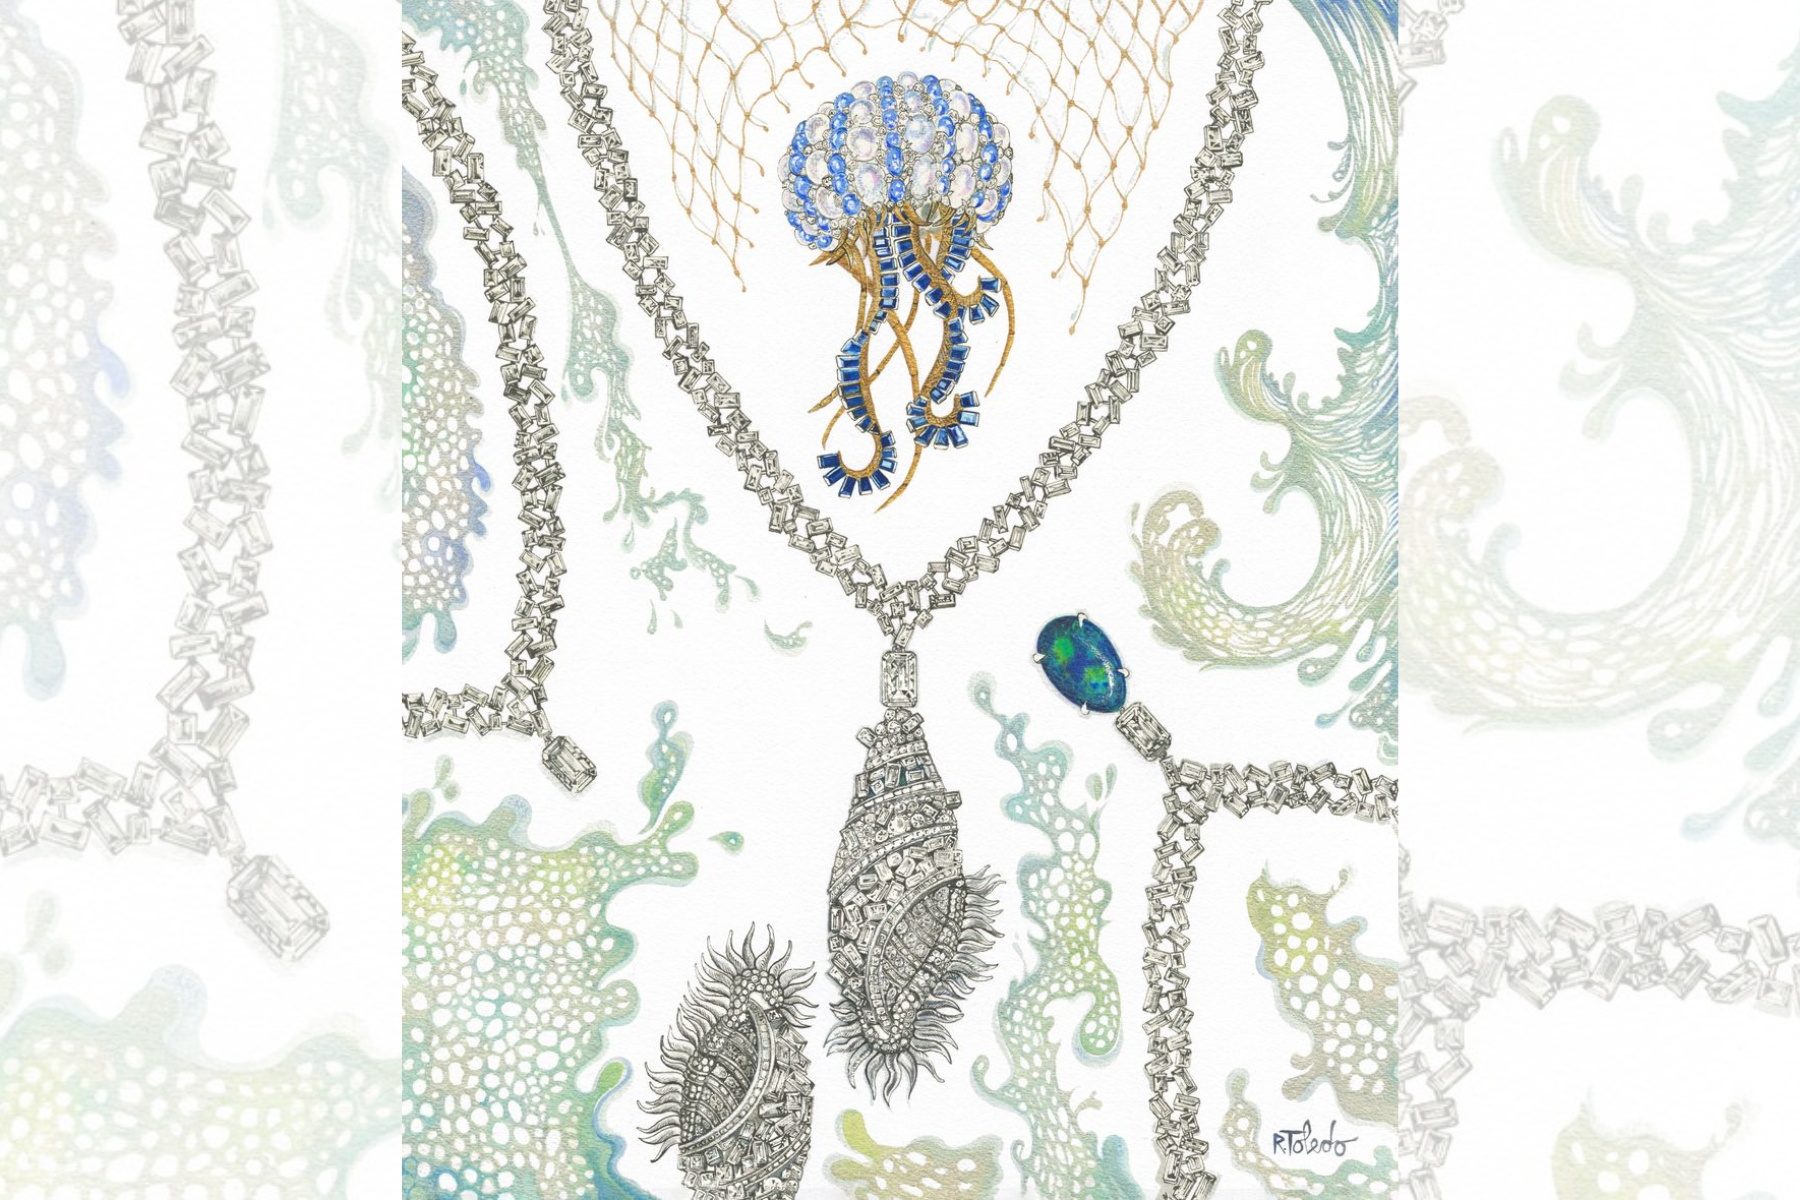 Tiffany & Co.’s new Blue Book collection, Out of the Blue, is an aquatic fantasia featuring the world’s most exquisite gems